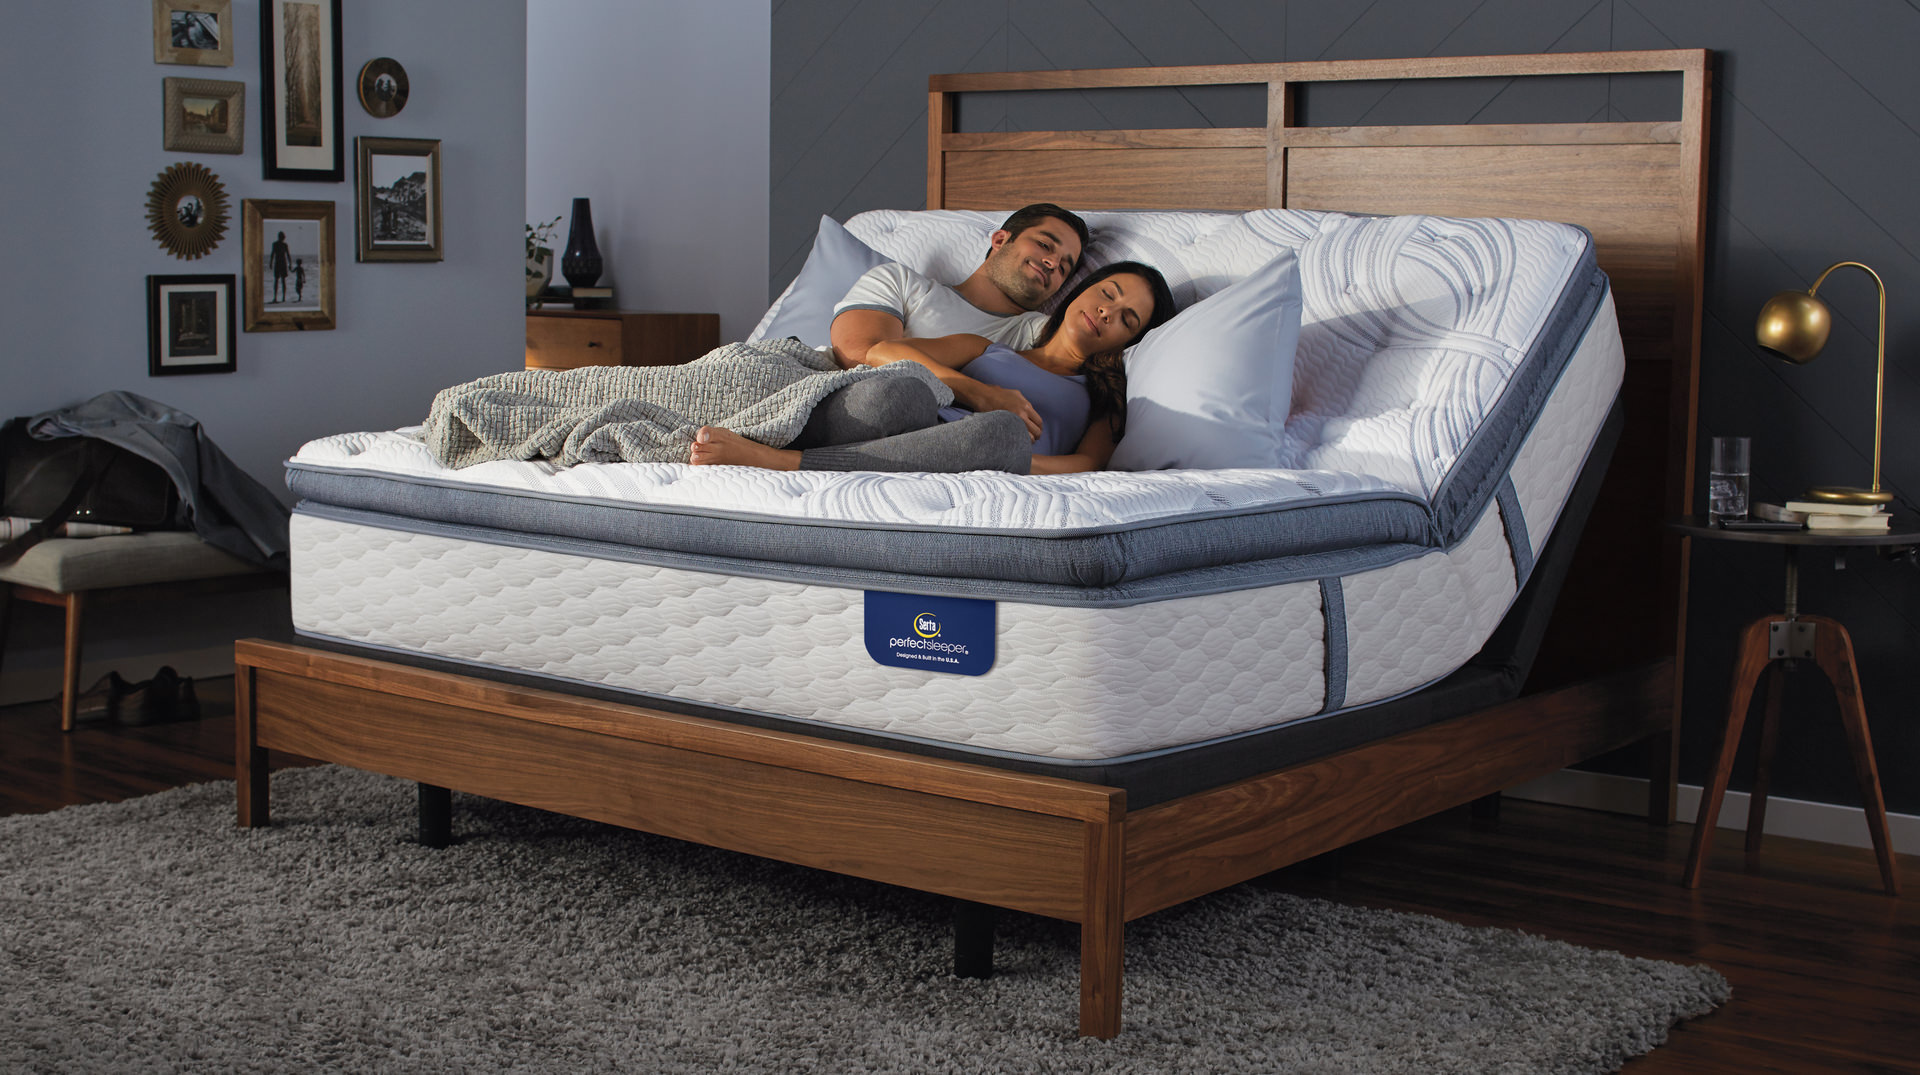 The Best Adjustable Beds and Buying Guide